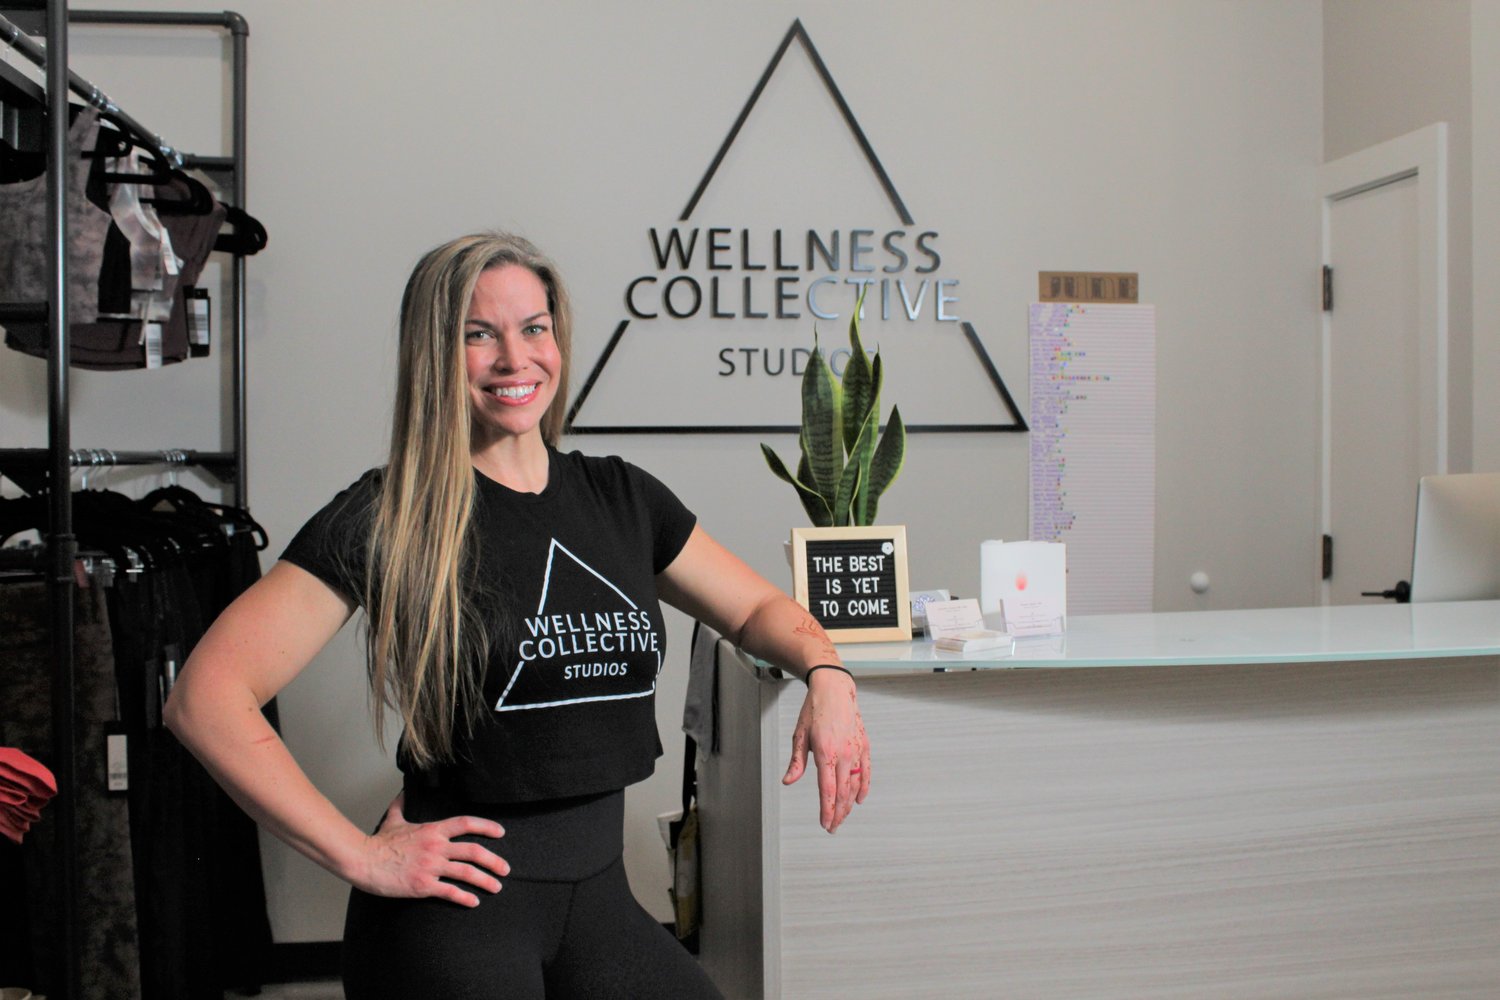 Amy Reaves, Wellness Collective